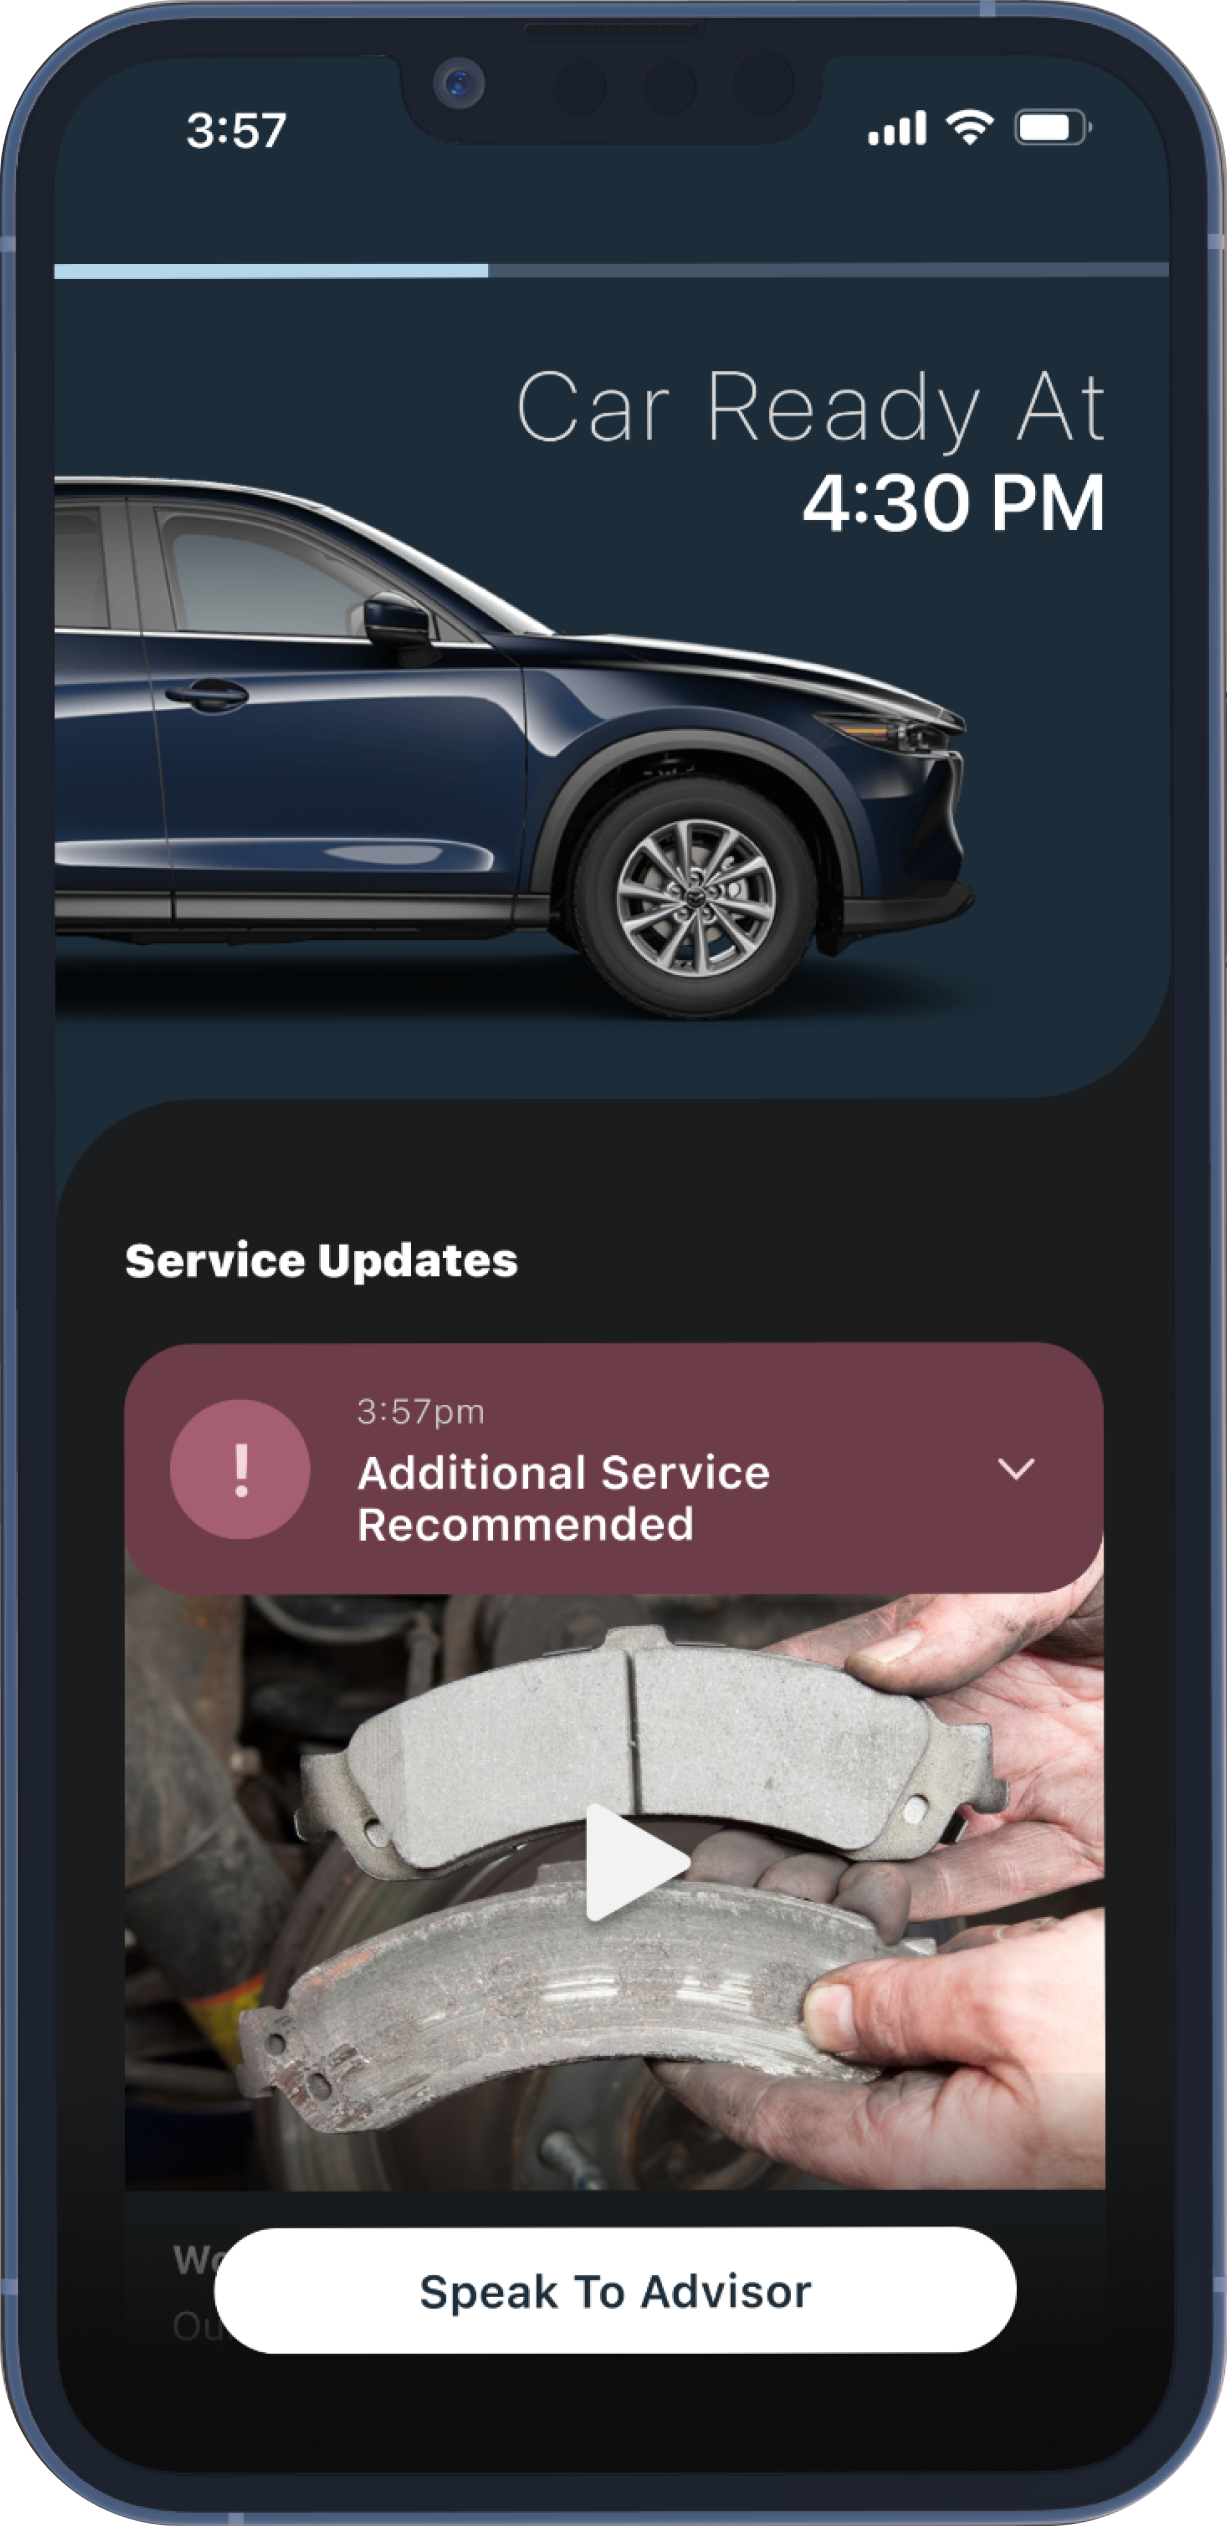 A screenshot of the live service screen showing video proof that an additional repair is required